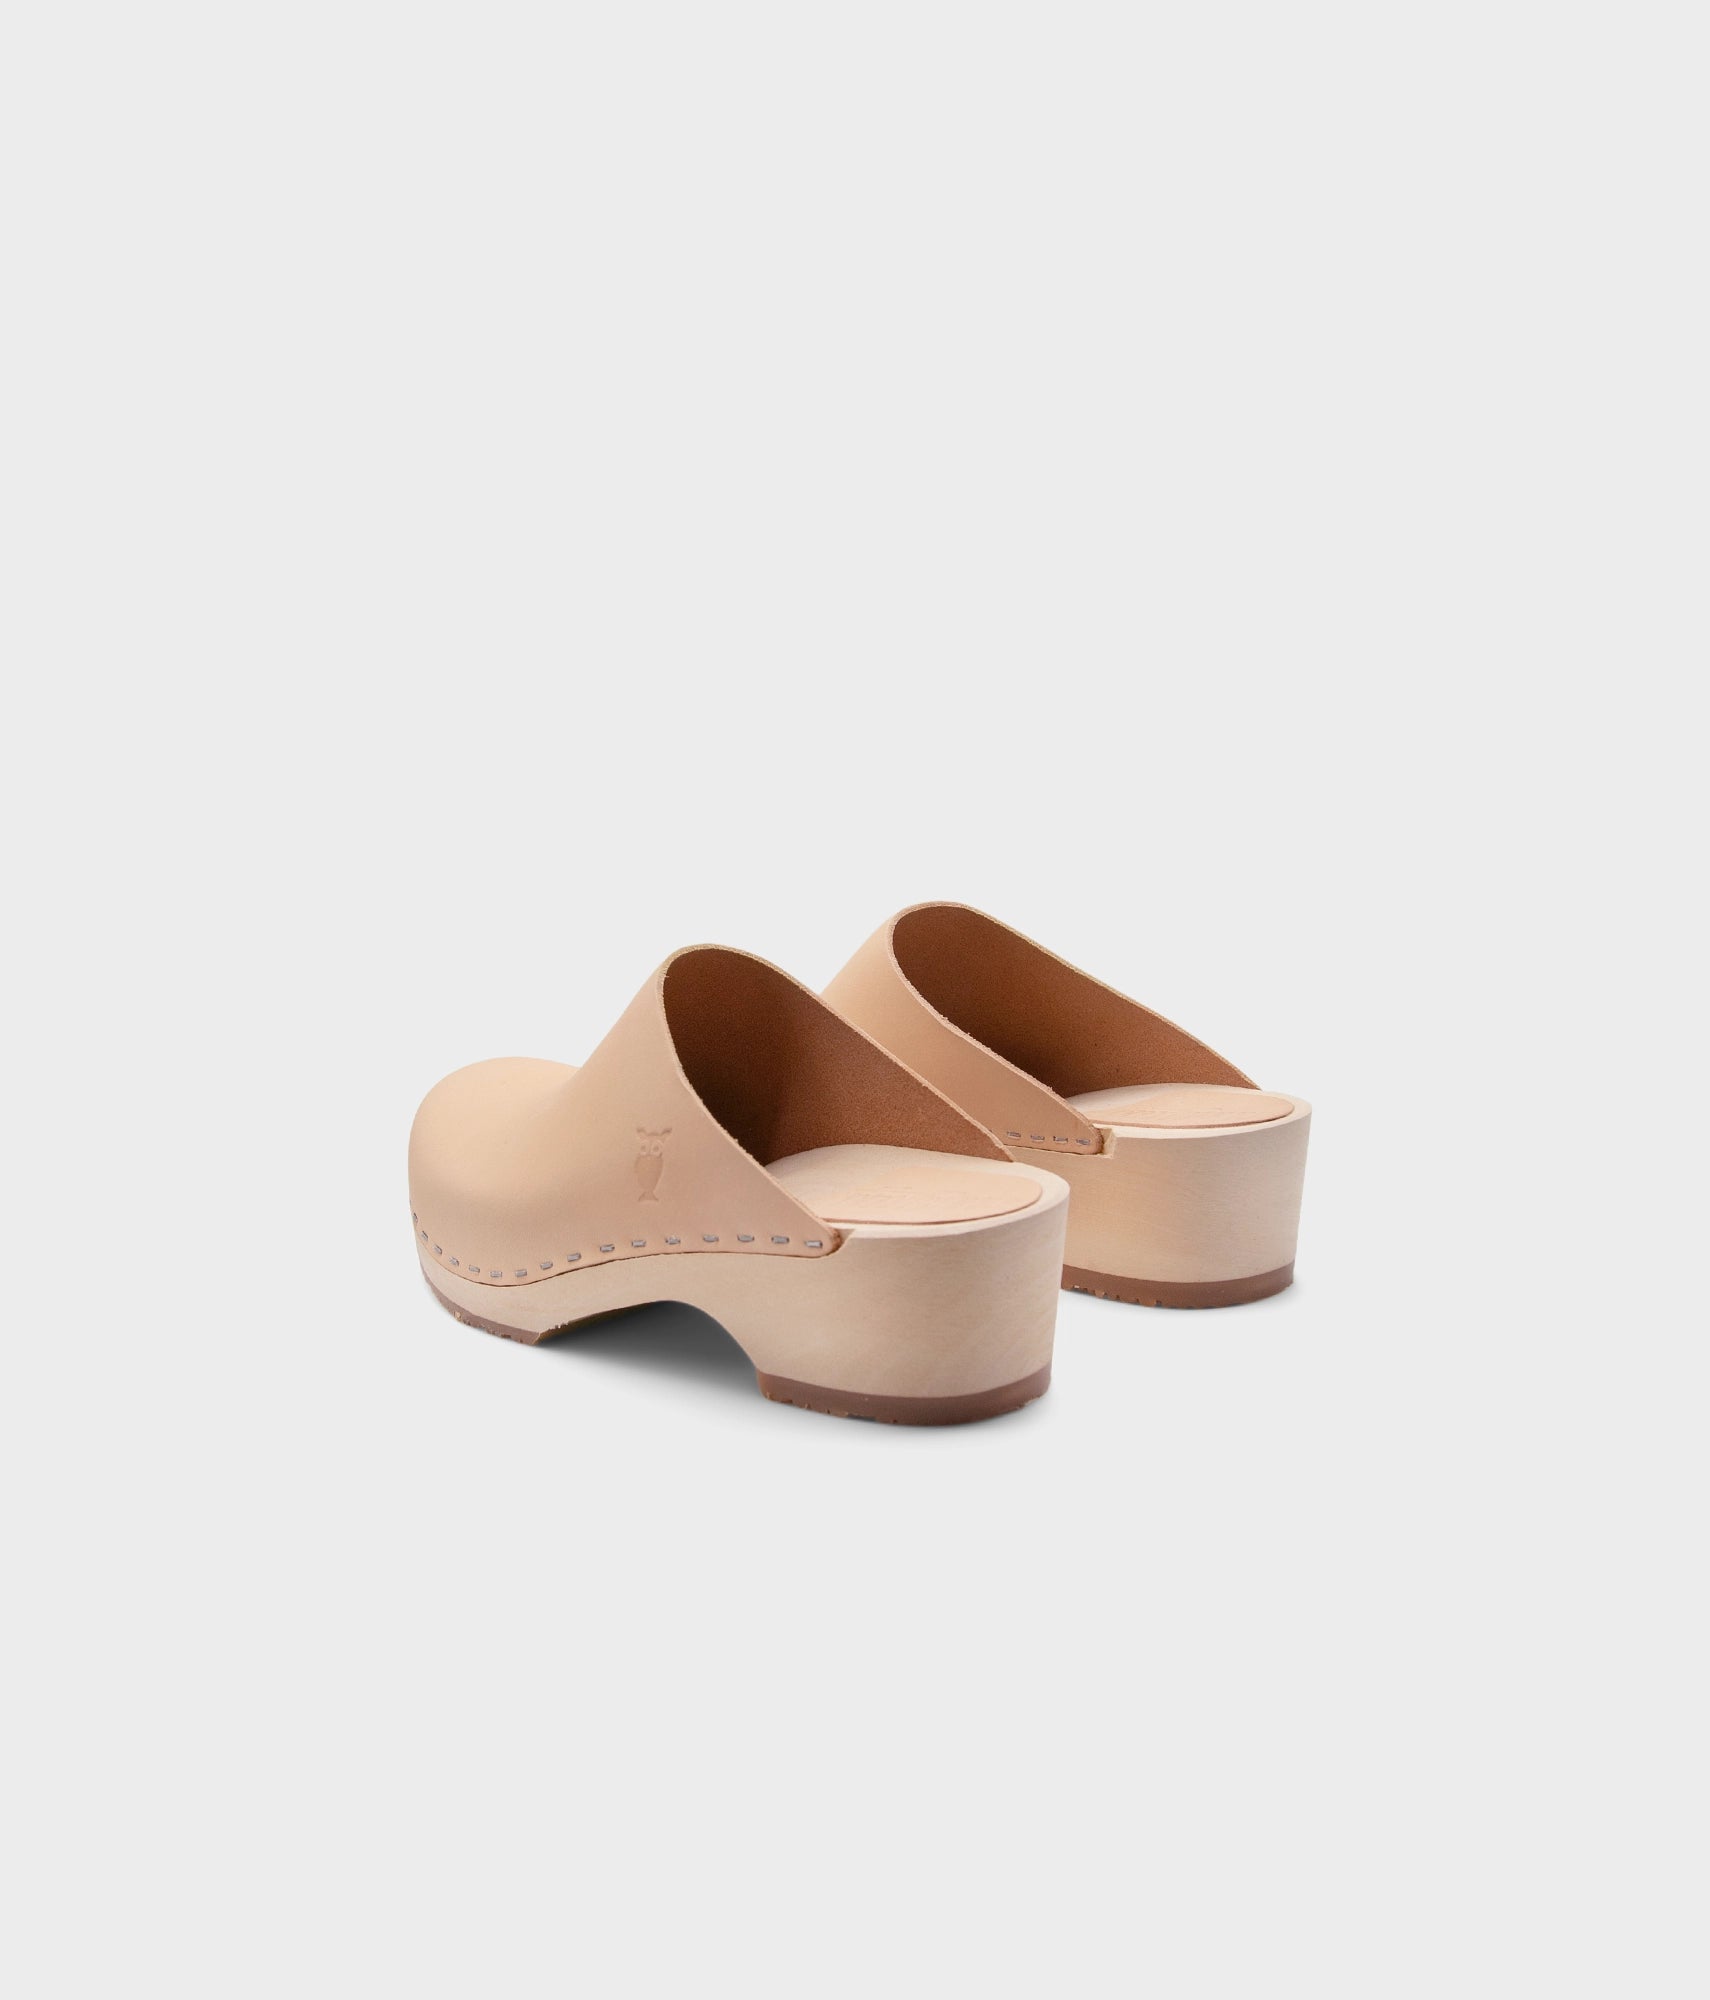 low heeled minimalistic clog mules in ecru beige vegetable tanned leather stapled on a light wooden base